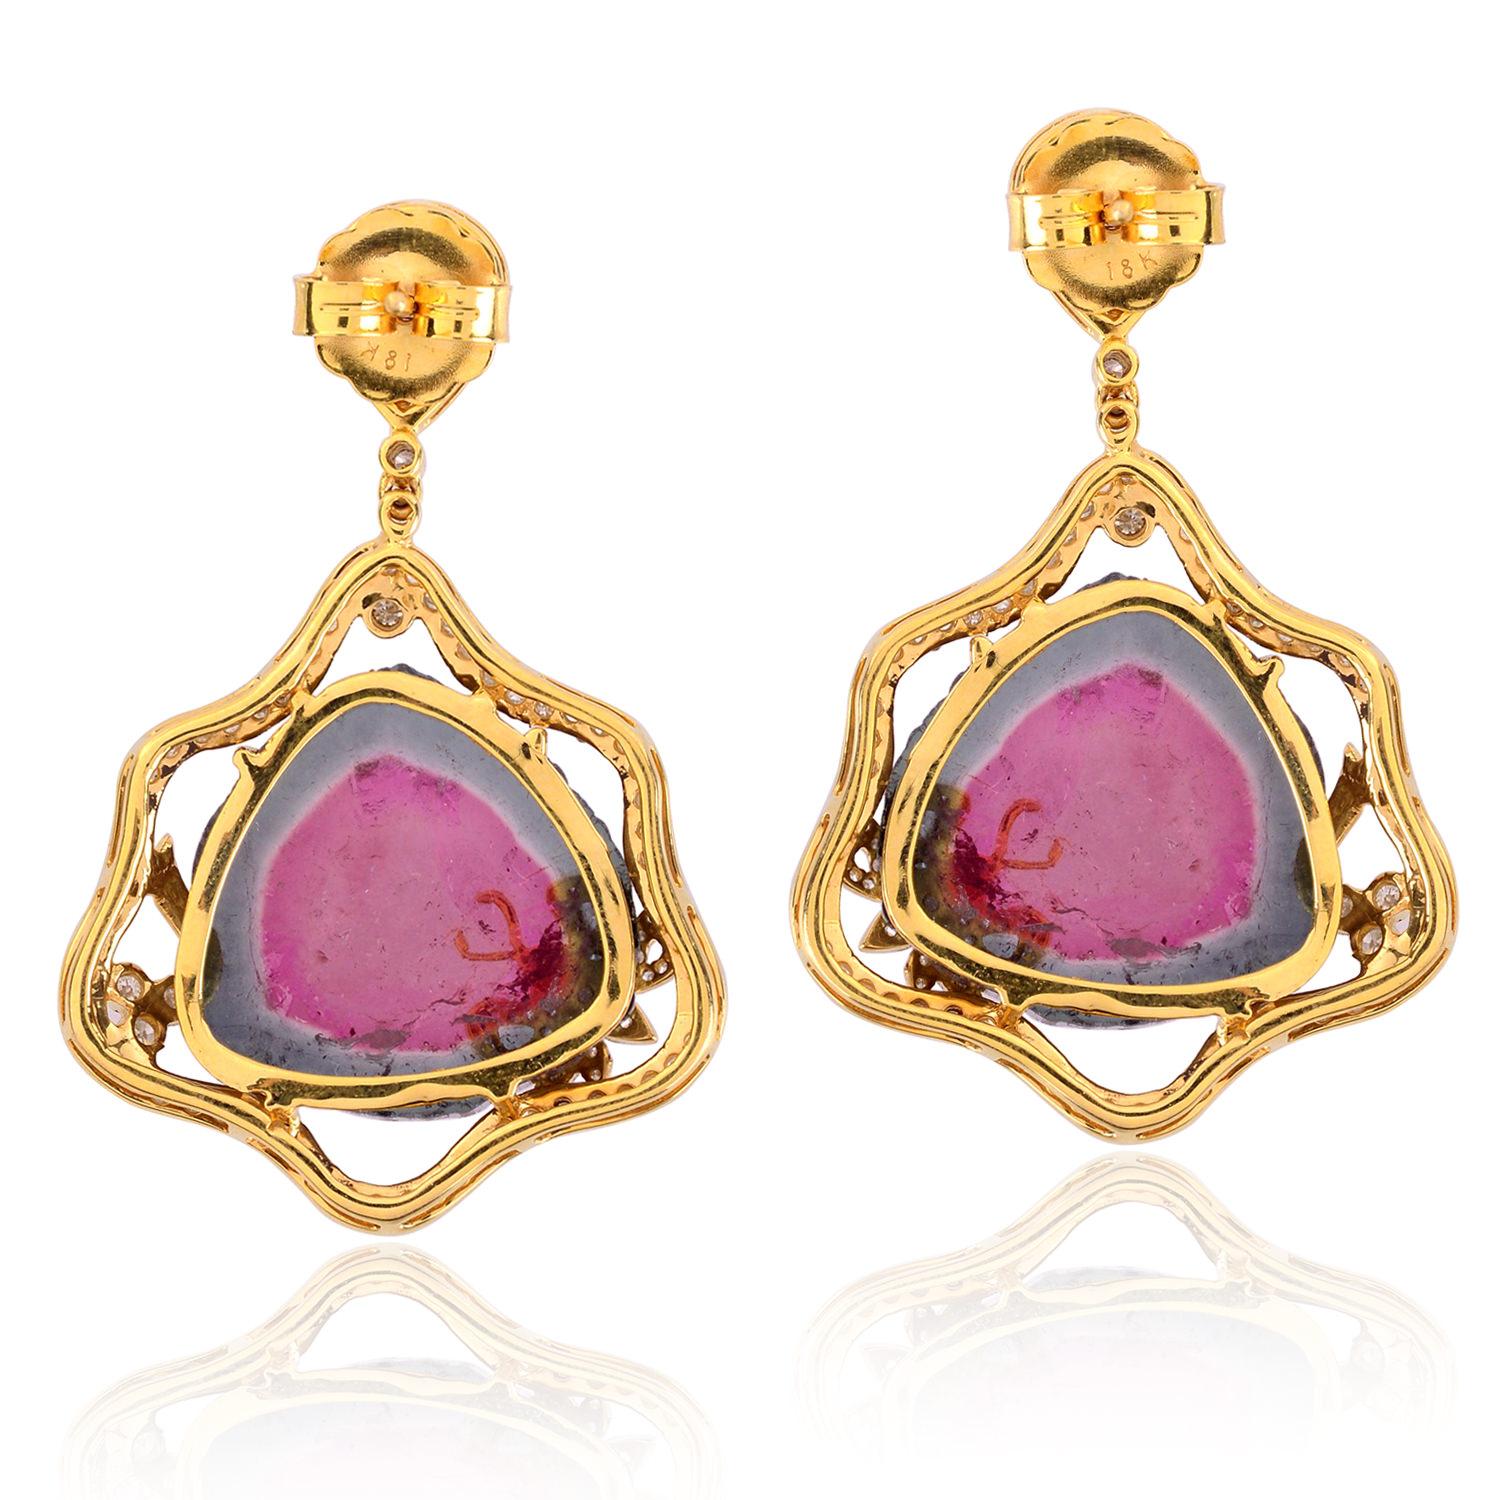 These beautiful drop earring are handcrafted in 18-karat gold. It is set with 28.55 carats tourmaline and 1.83 carats of glimmering diamonds.

FOLLOW  MEGHNA JEWELS storefront to view the latest collection & exclusive pieces.  Meghna Jewels is